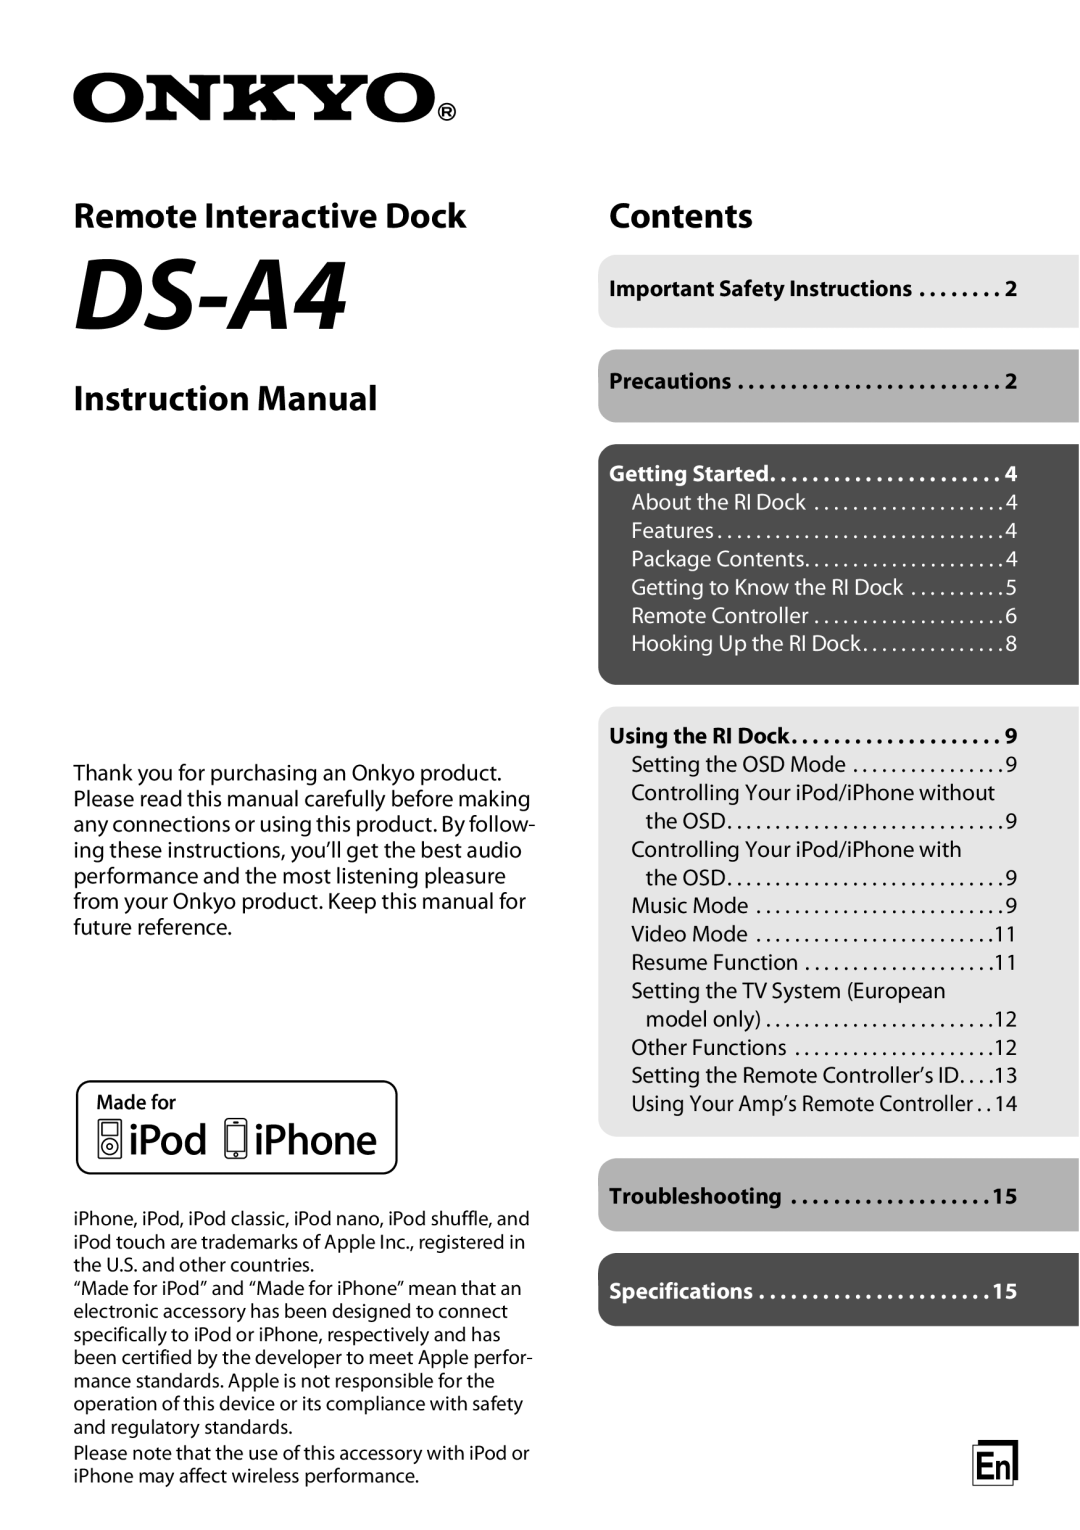 Onkyo DS-A4 instruction manual Remote Interactive Dock, Instruction Manual, Contents, Using the RI Dock, Troubleshooting 